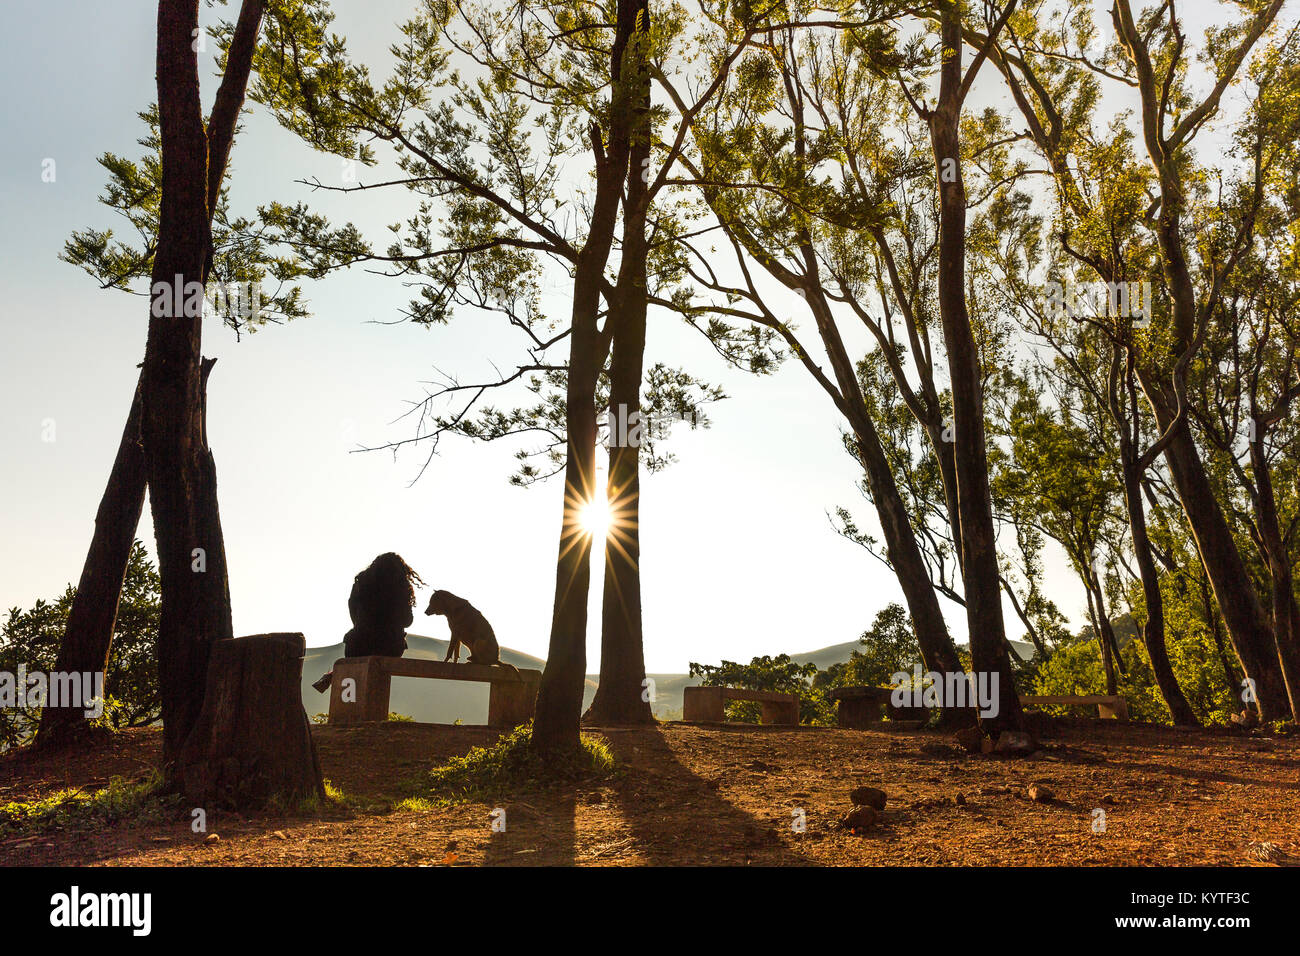 A dog and a woman watch the sunrise together at Kemmangundi in Karnataka, India. Beautiful early morning golden light, tall trees, forest, mountains. Stock Photo